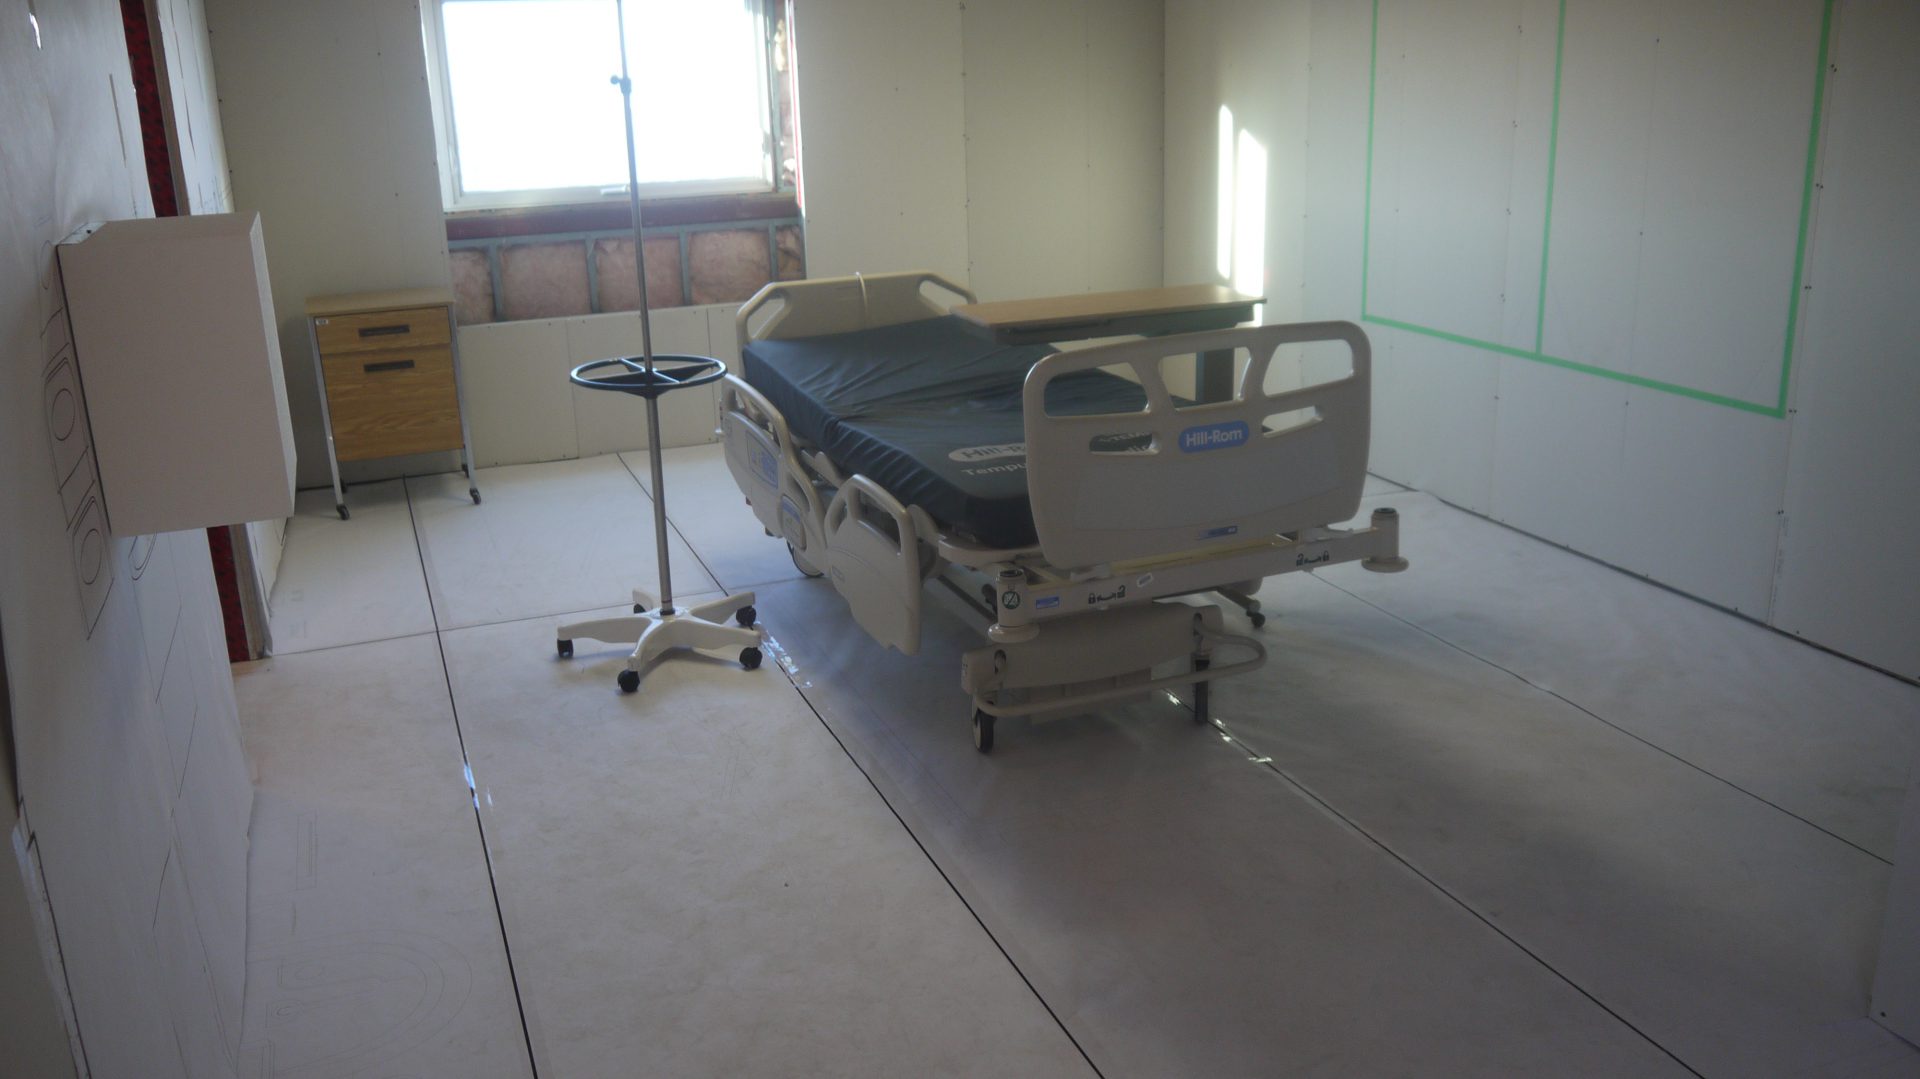 A mock-up design of a single patient room.